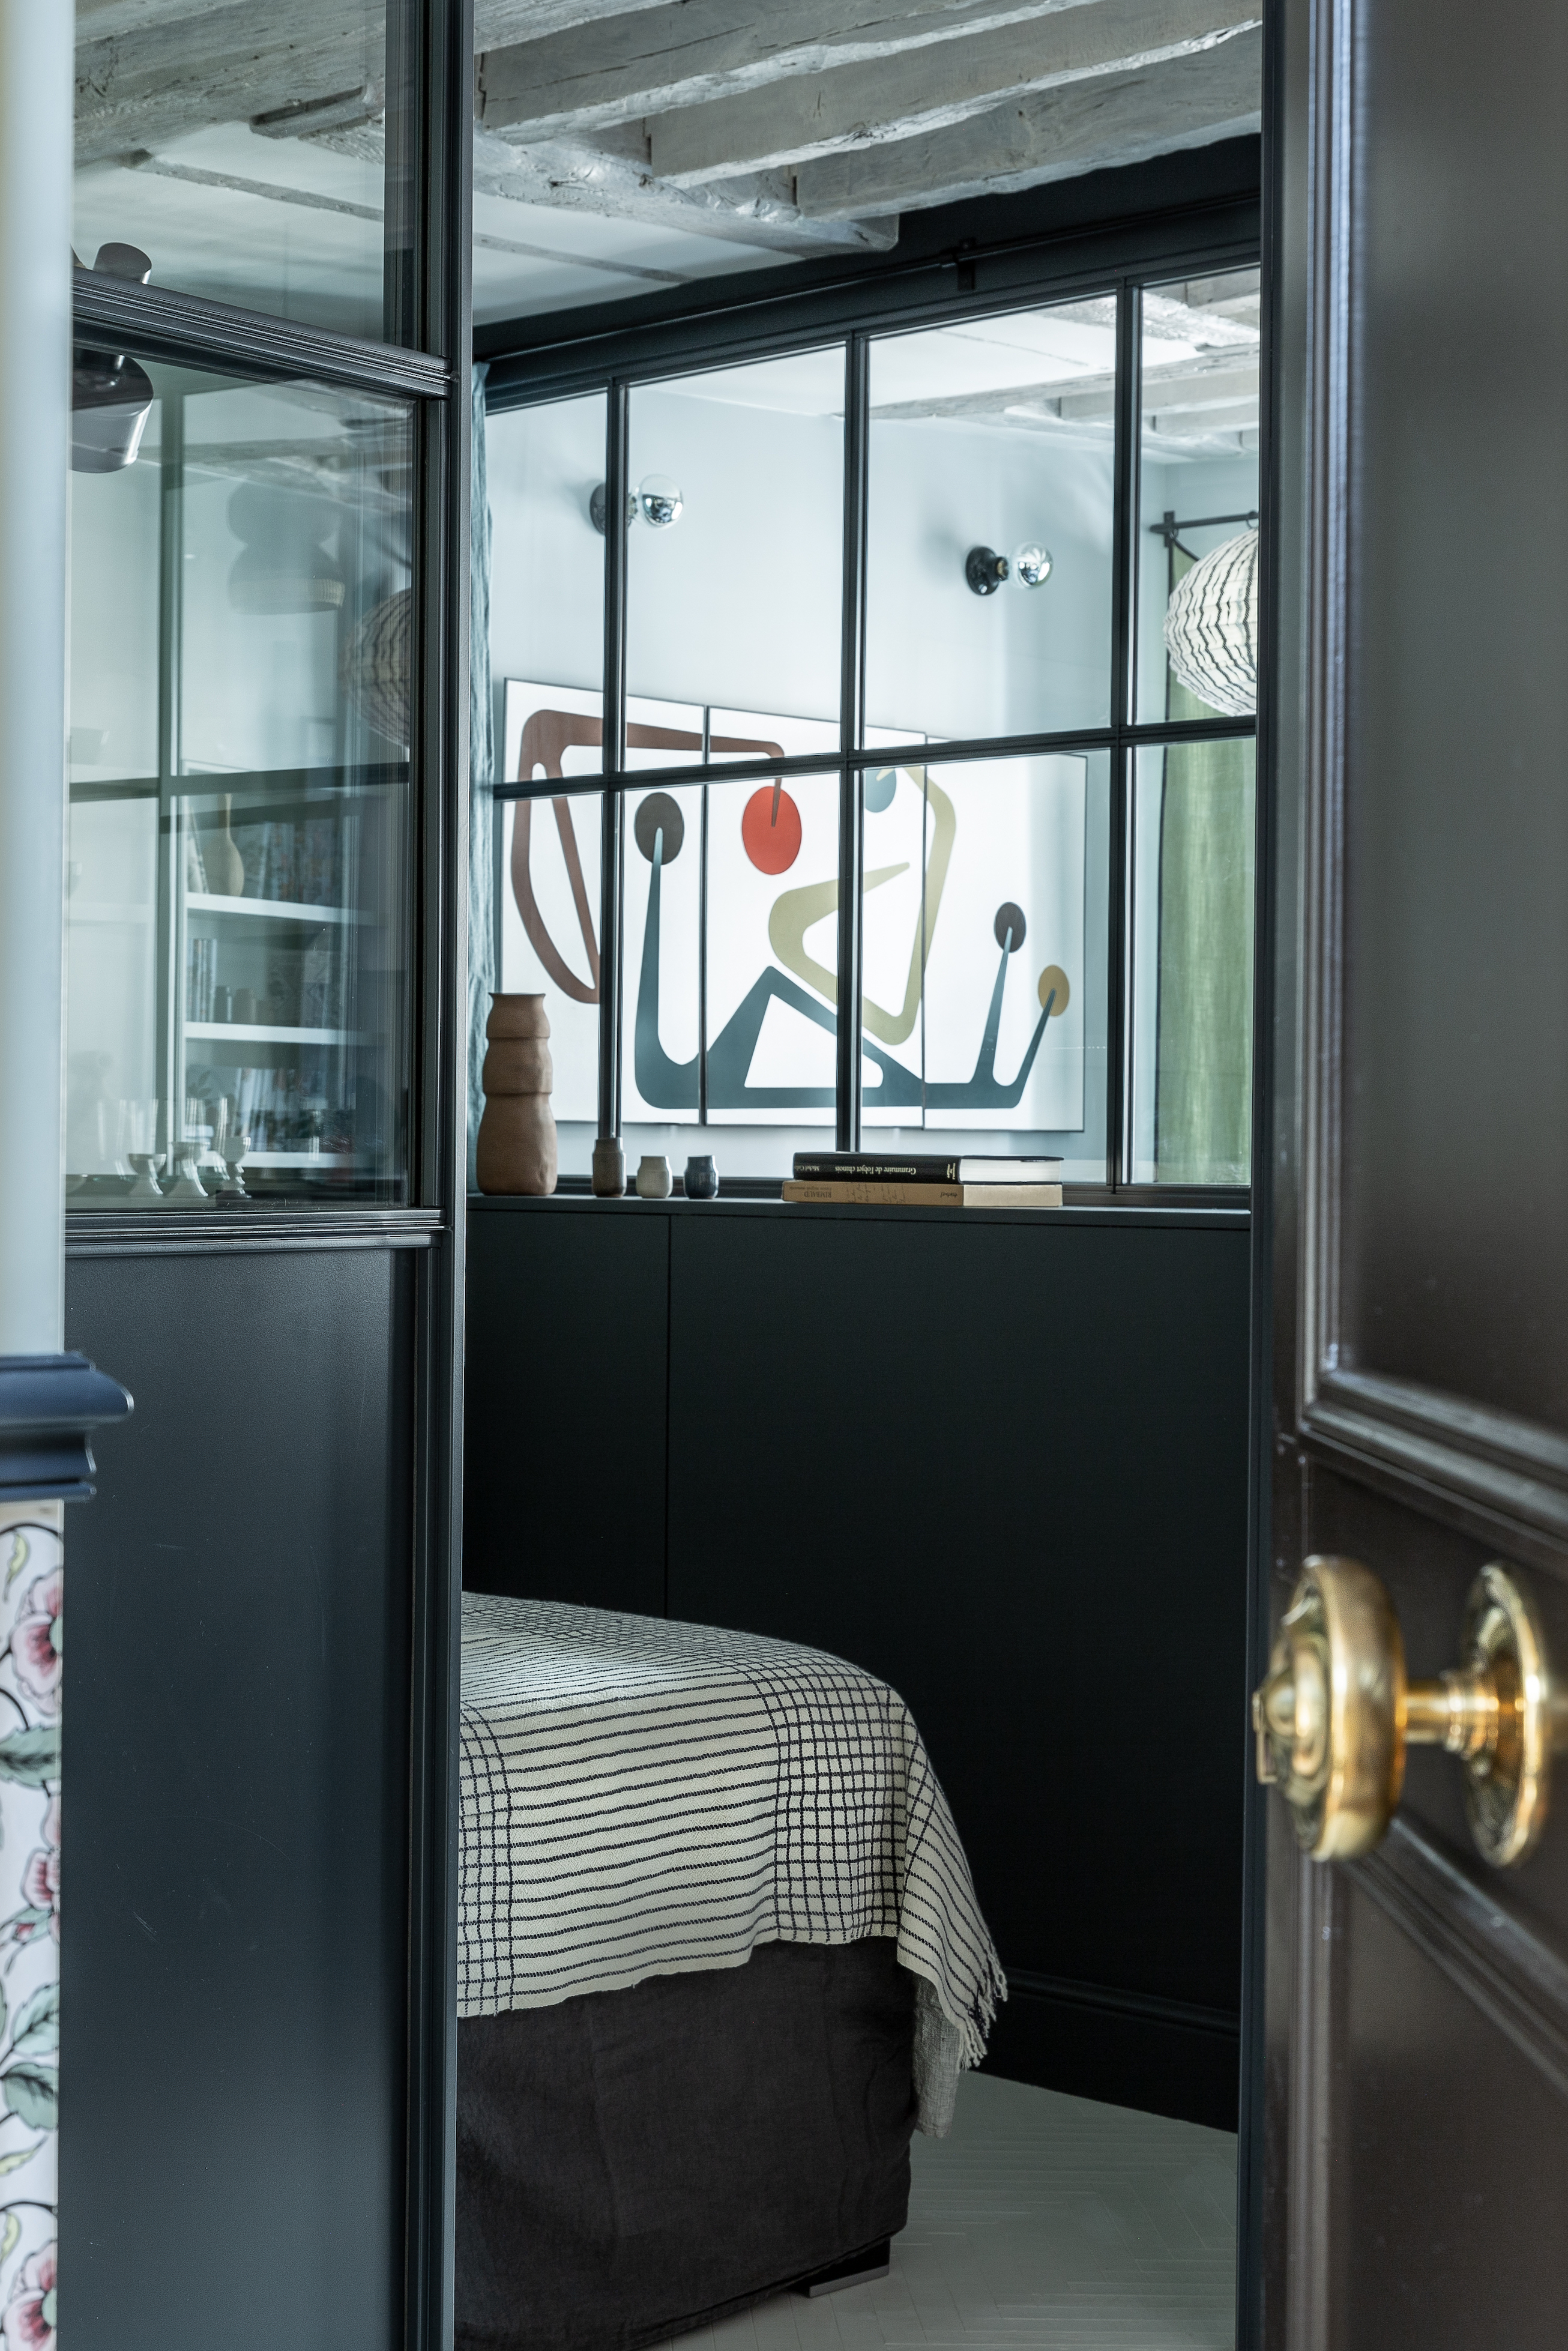 Bedroom enclosed by interior windows: Sabine's Paris apartment remodel by Marianne Evennou. Grégory Timsit photo.